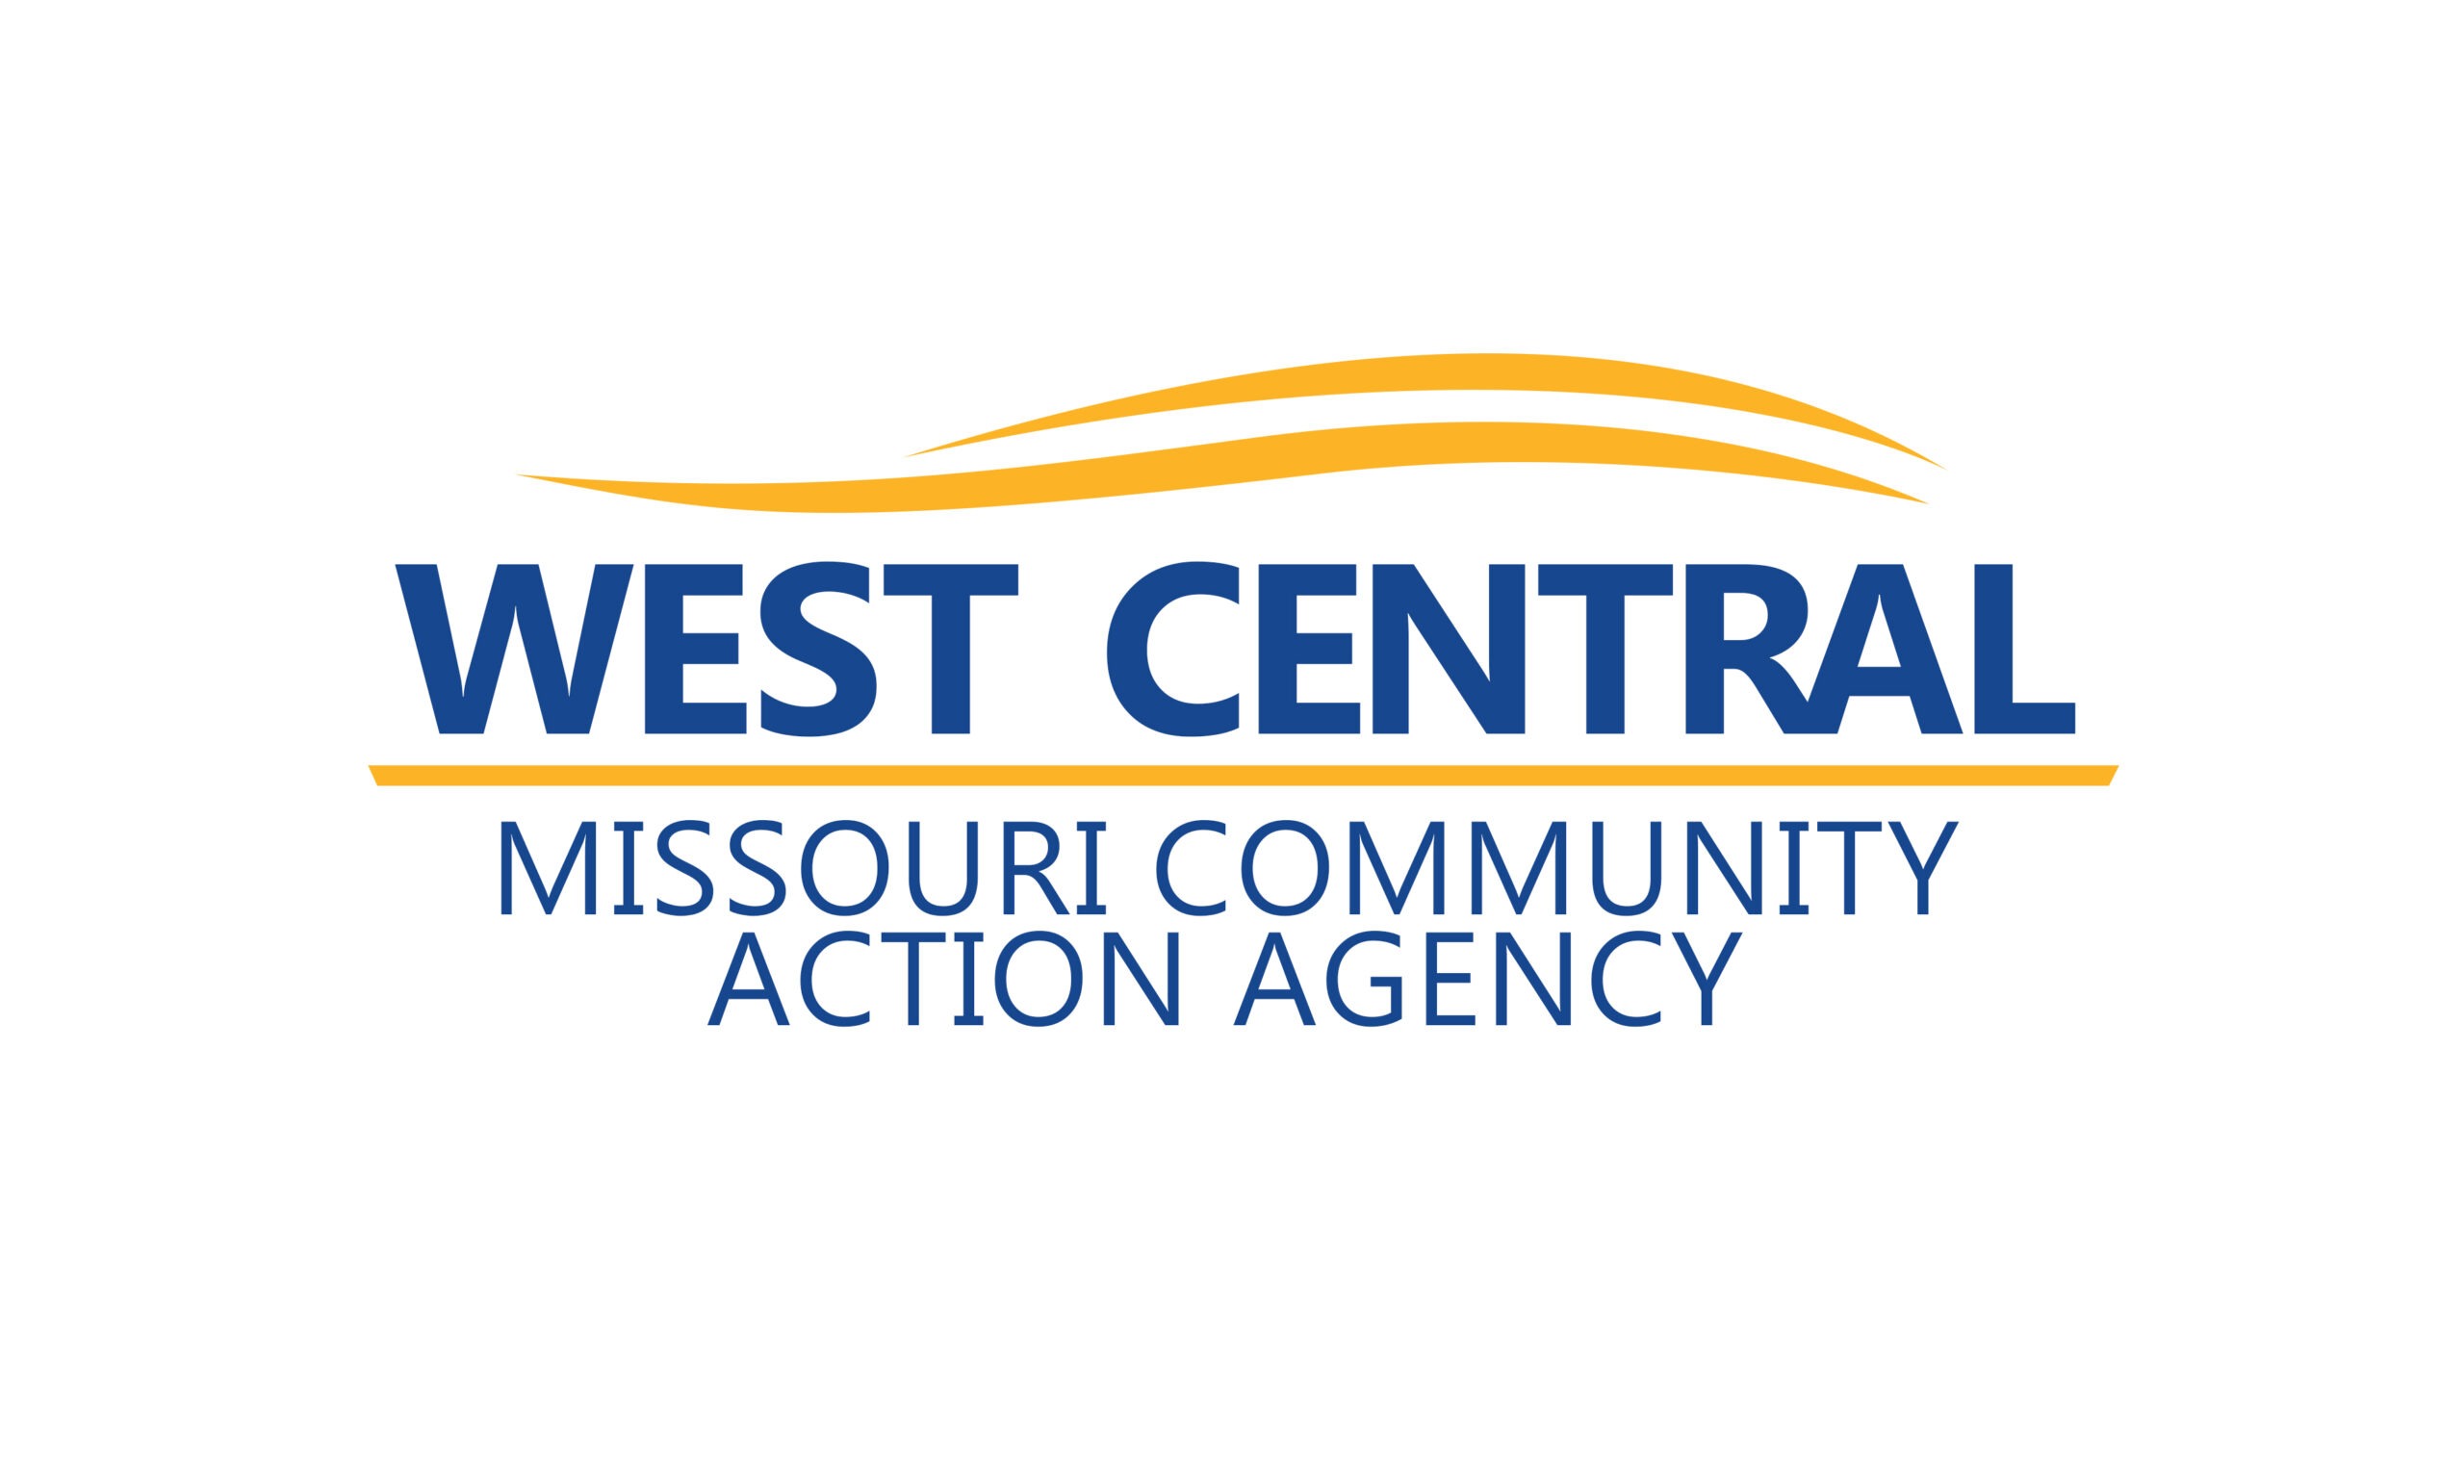 West Central Missouri Community Action Agency